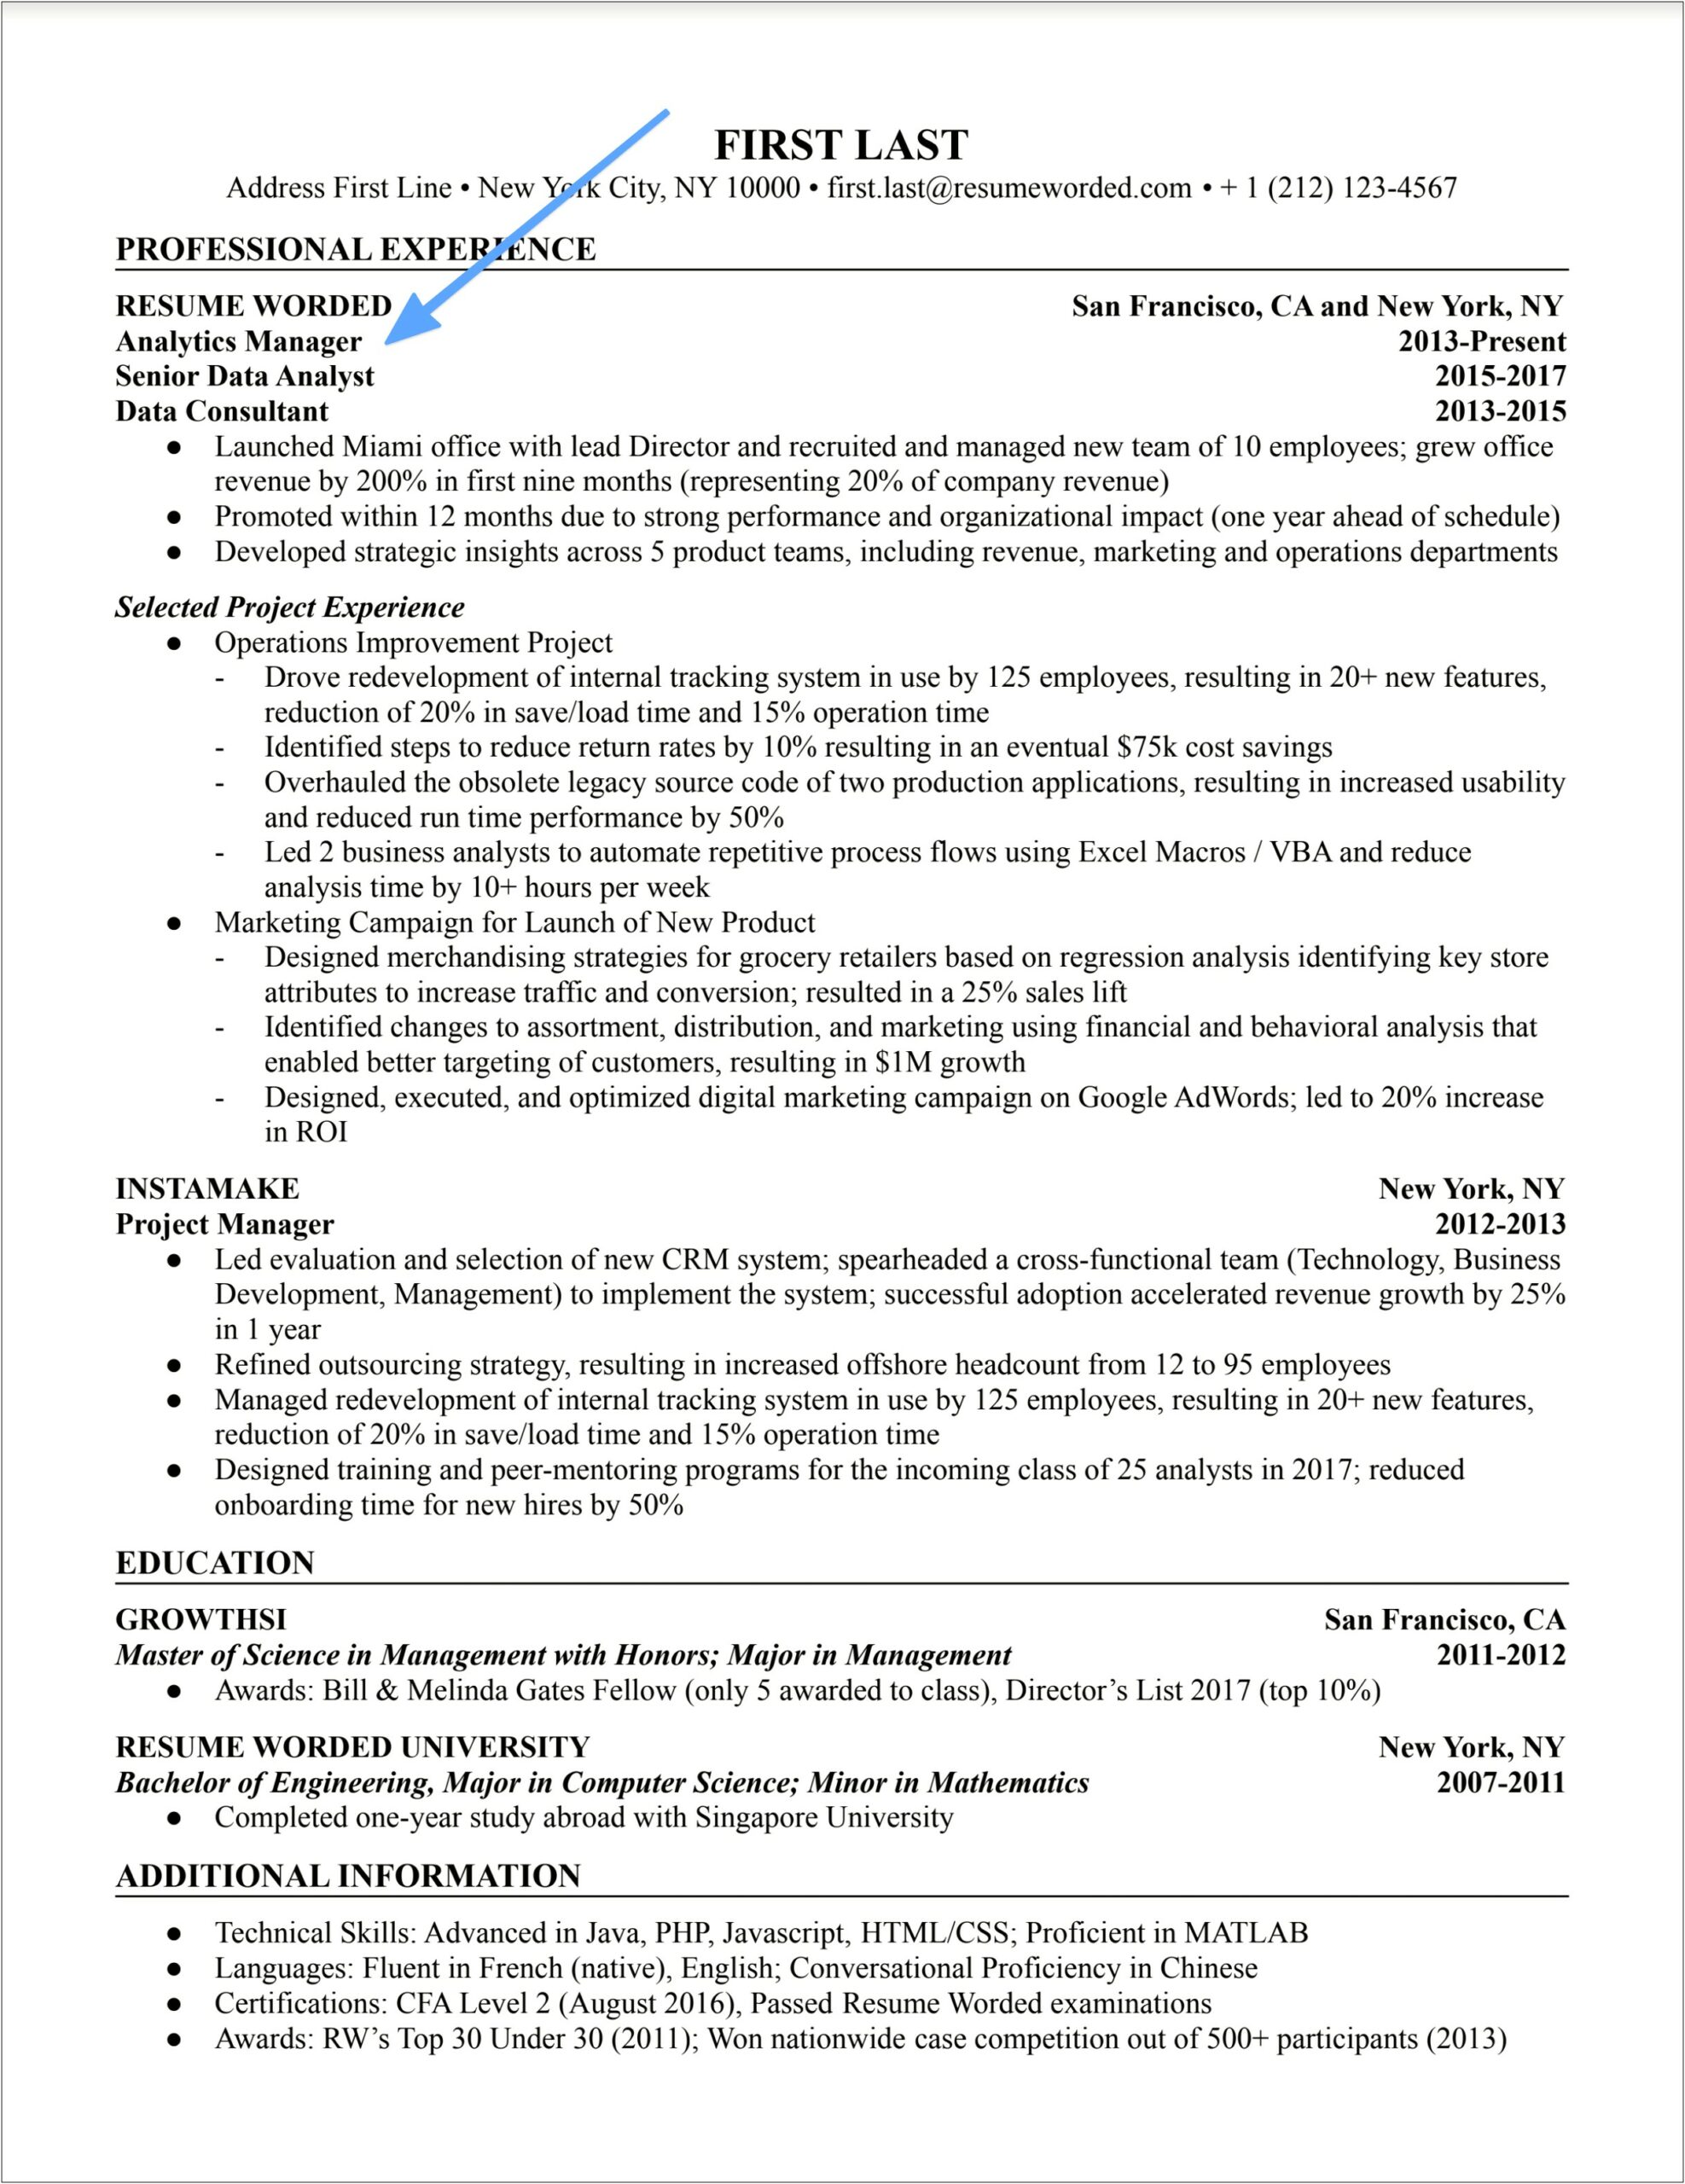 A Good Resume For Analytics Position